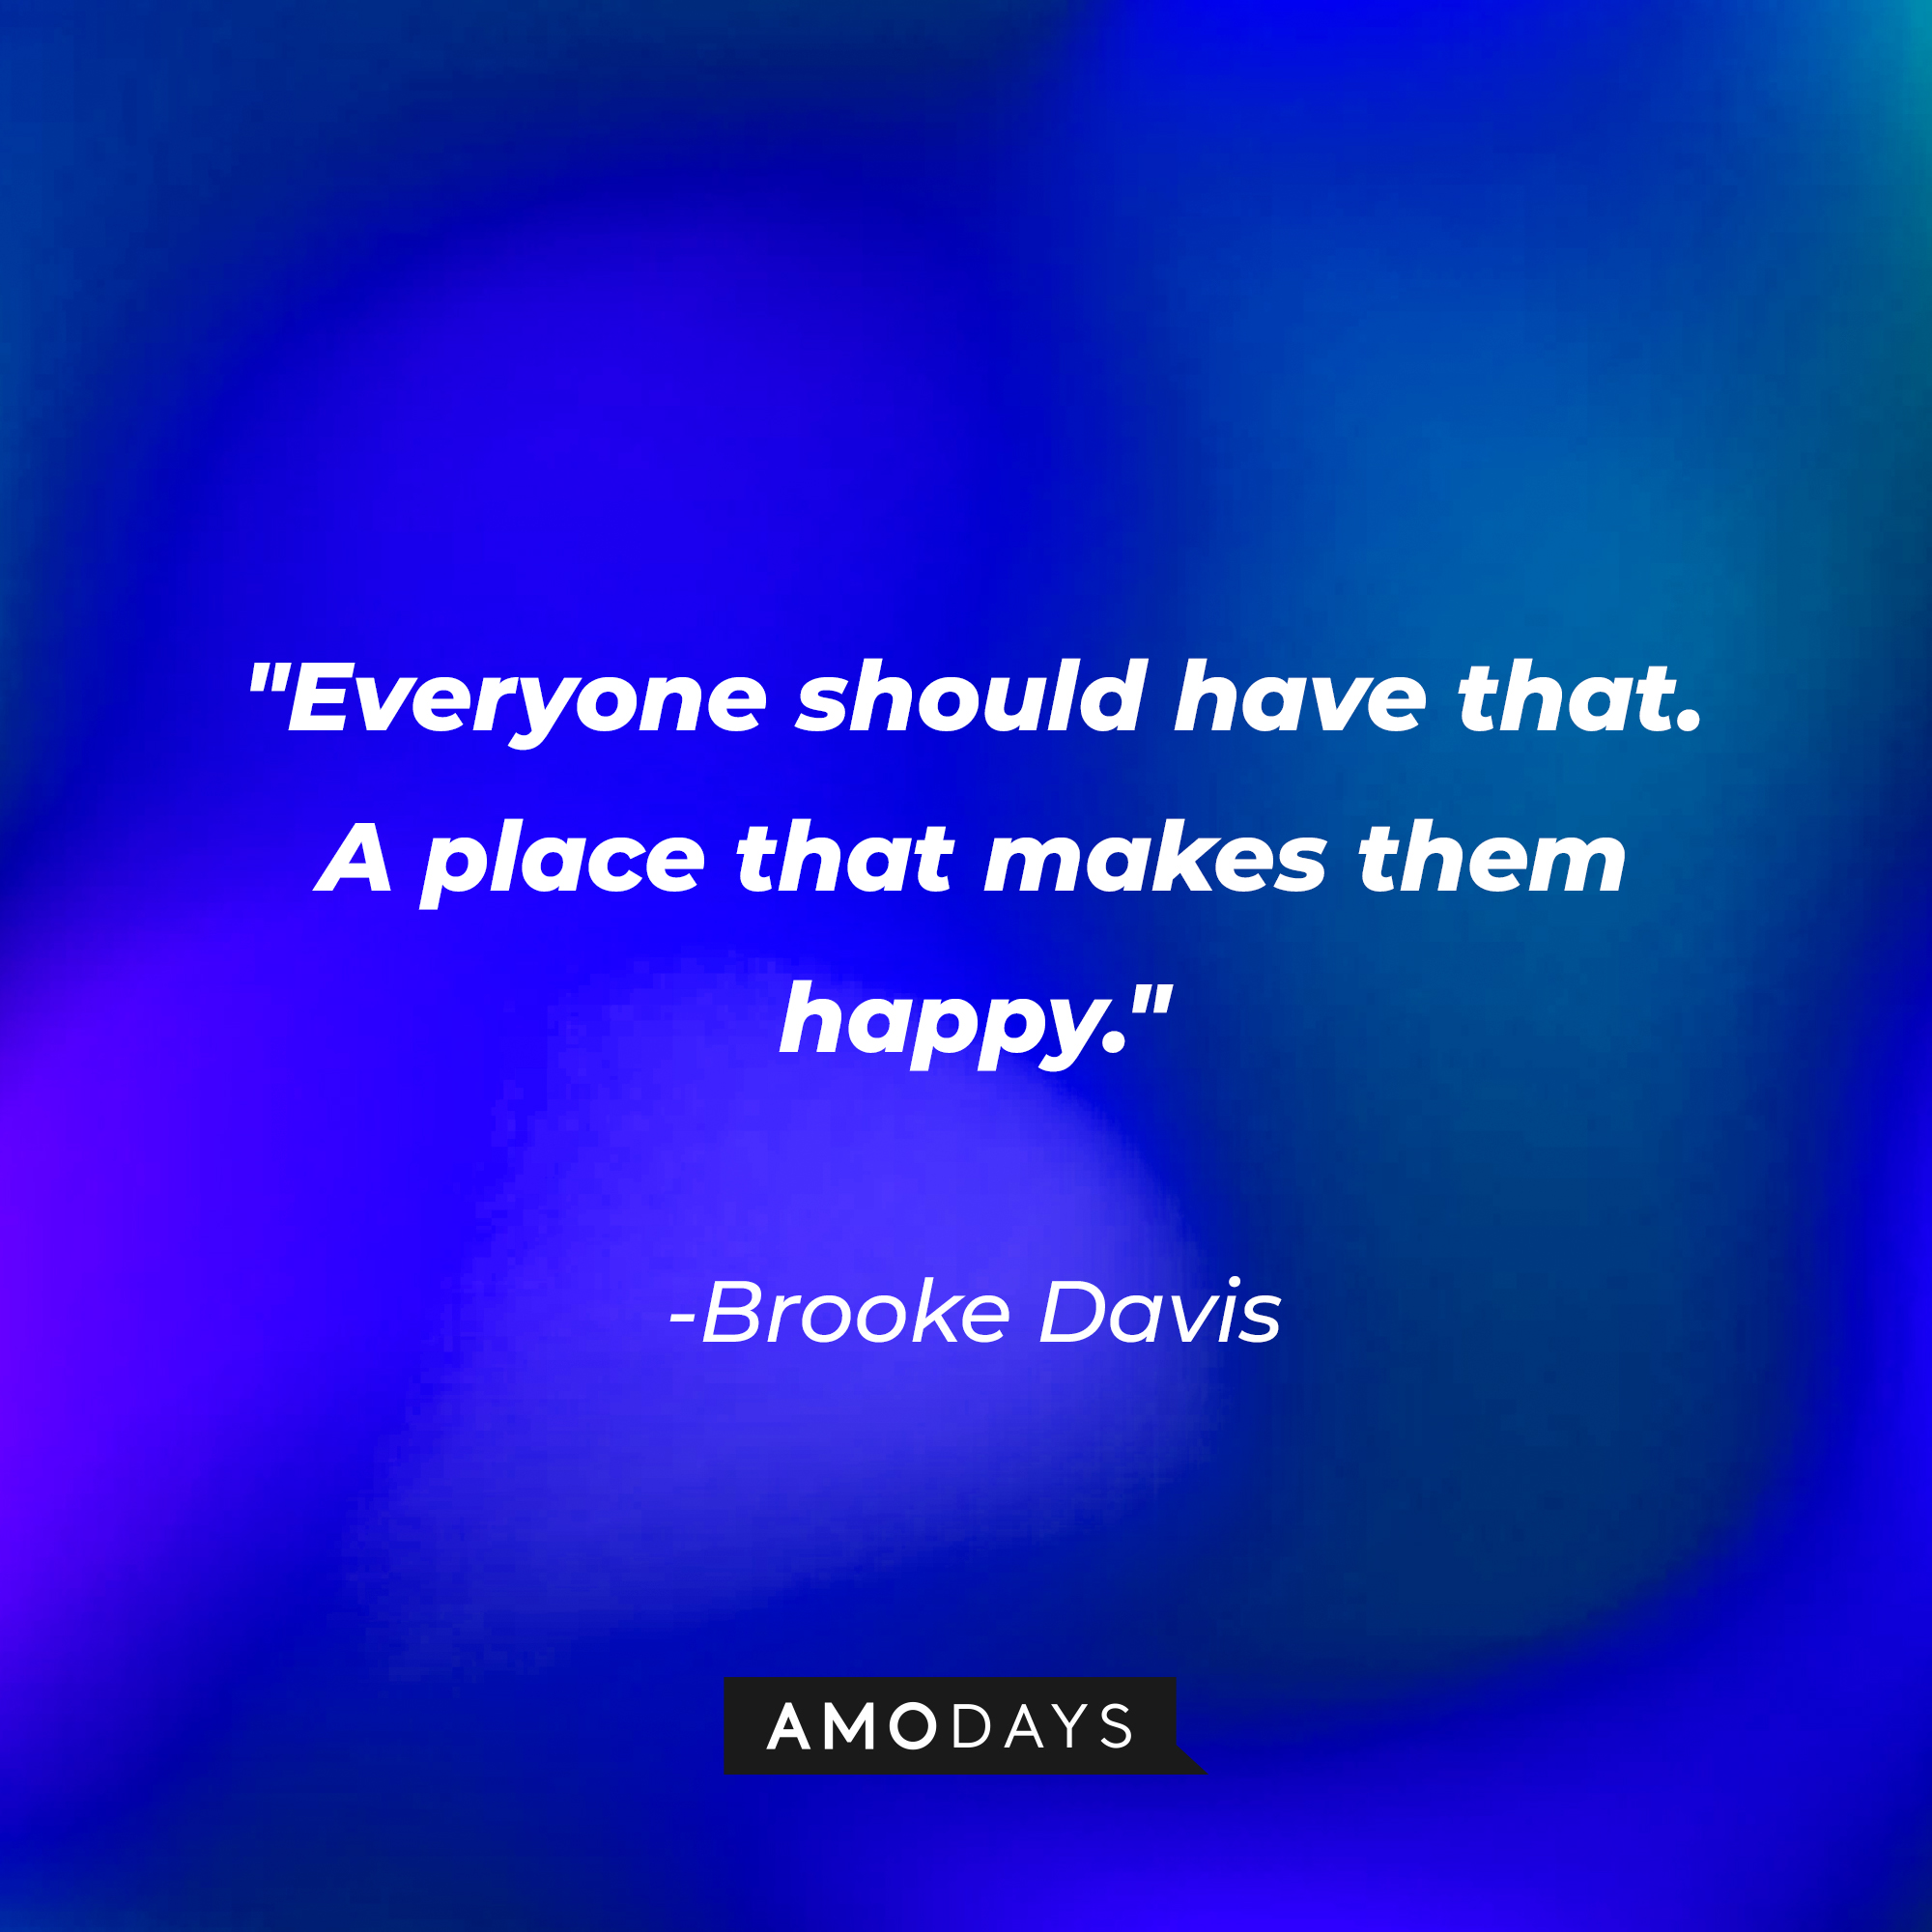 Brooke Davis' quote: "Everyone should have that. A place that makes them happy." | Source: AmoDays